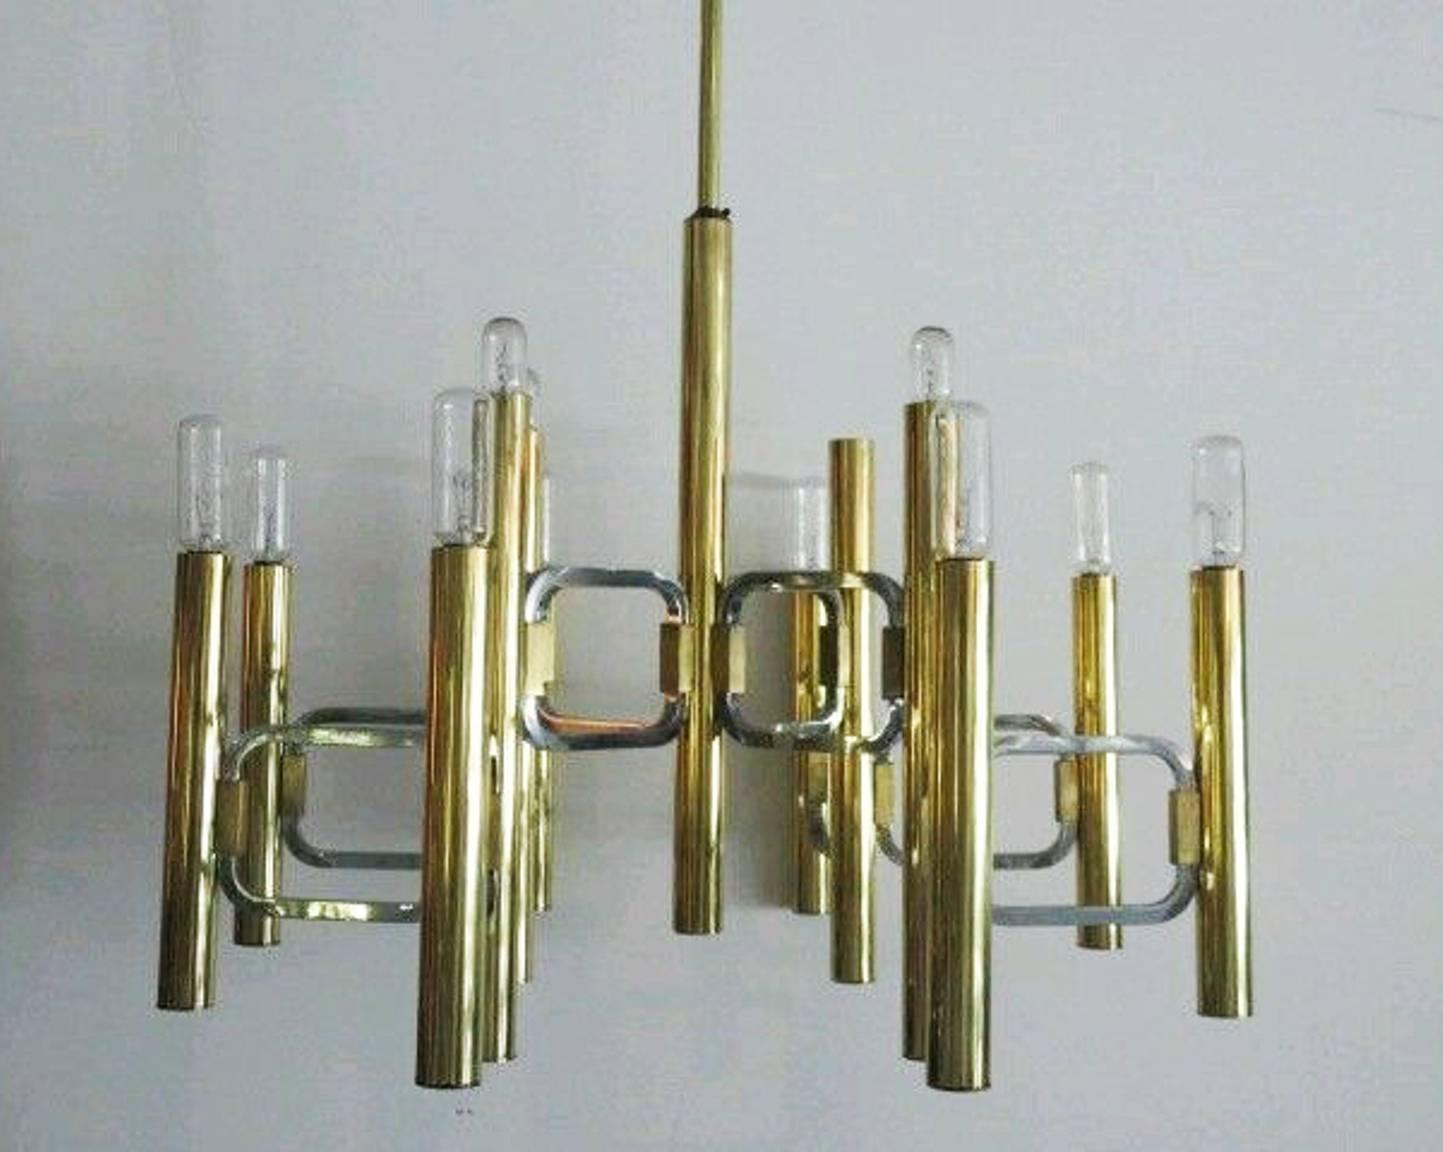 A circa 1960s Italian modern mixed-metal chandelier by designer Gaetano Sciolari, with brass stem and tubular socket covers, detailed with geometric arms in chrome. Includes original [Sciolari] sticker. Very good vintage condition, recently rewired